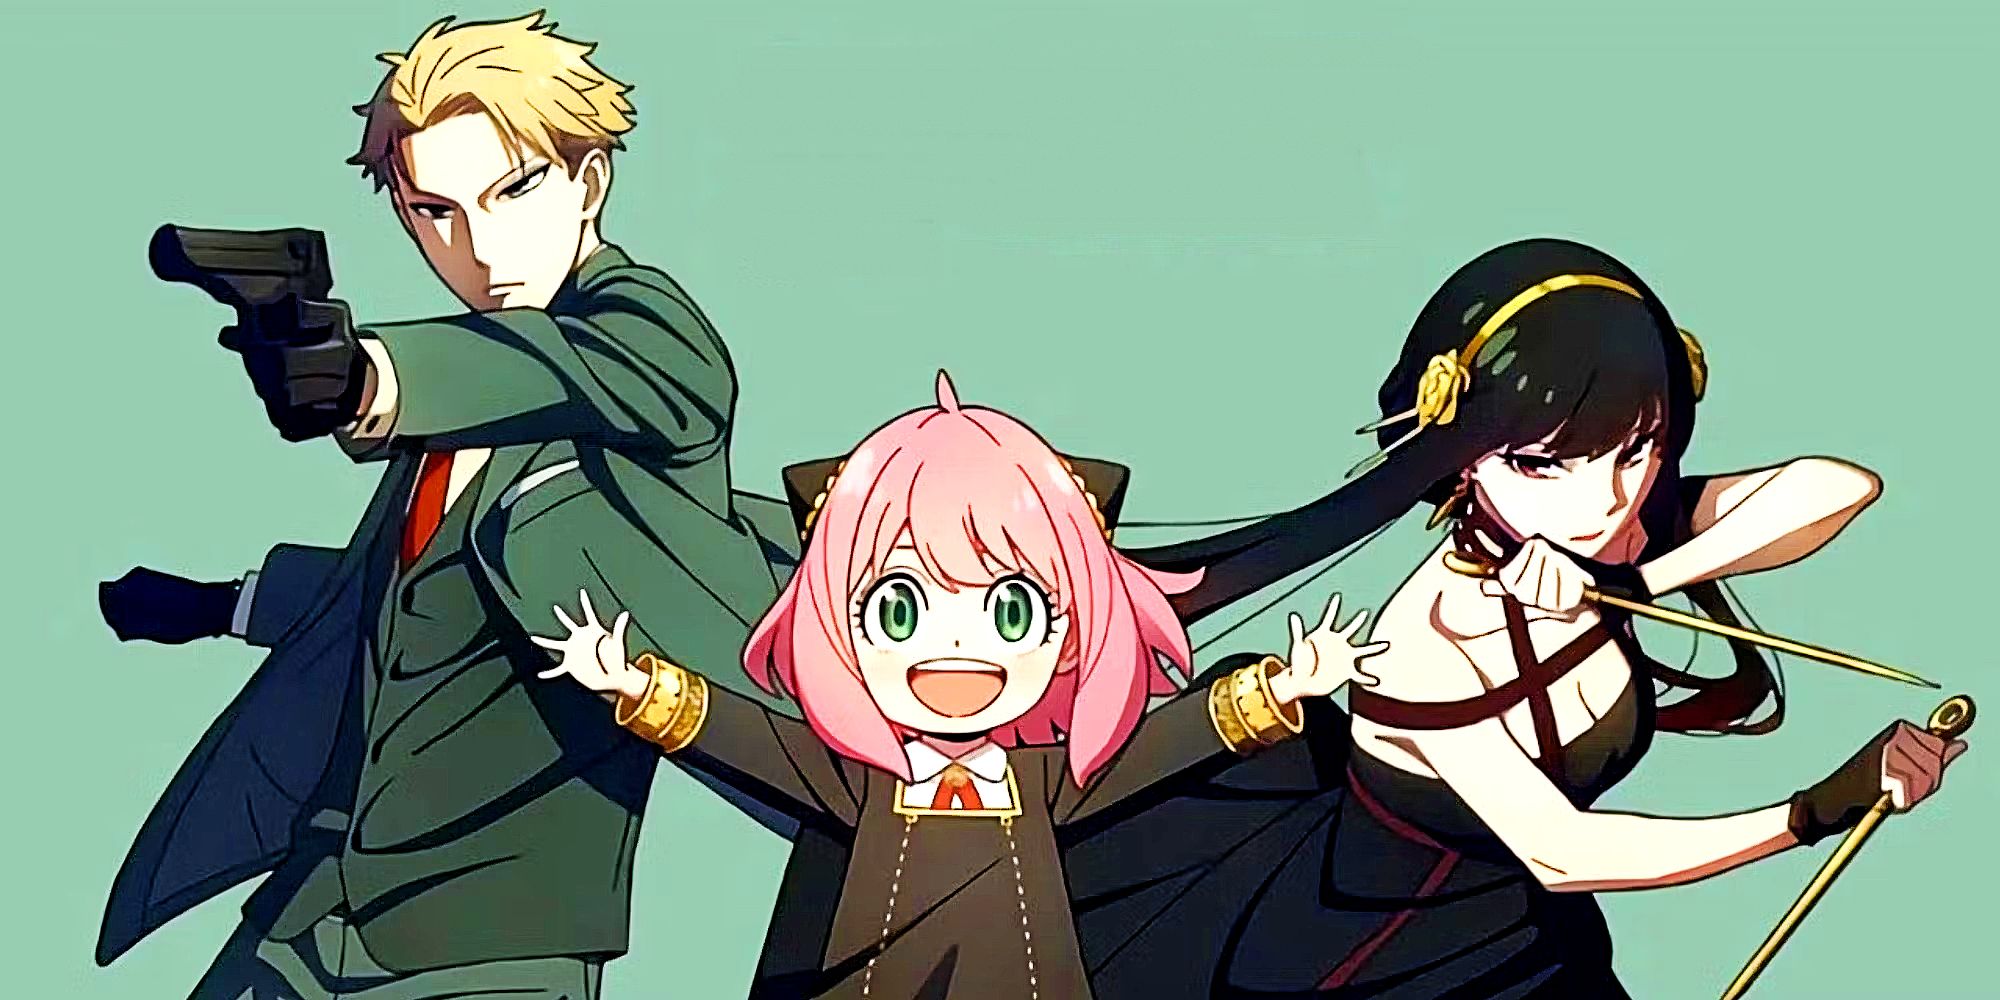 Classic Spy X Family cover pose with Loid, Anya, and Yor